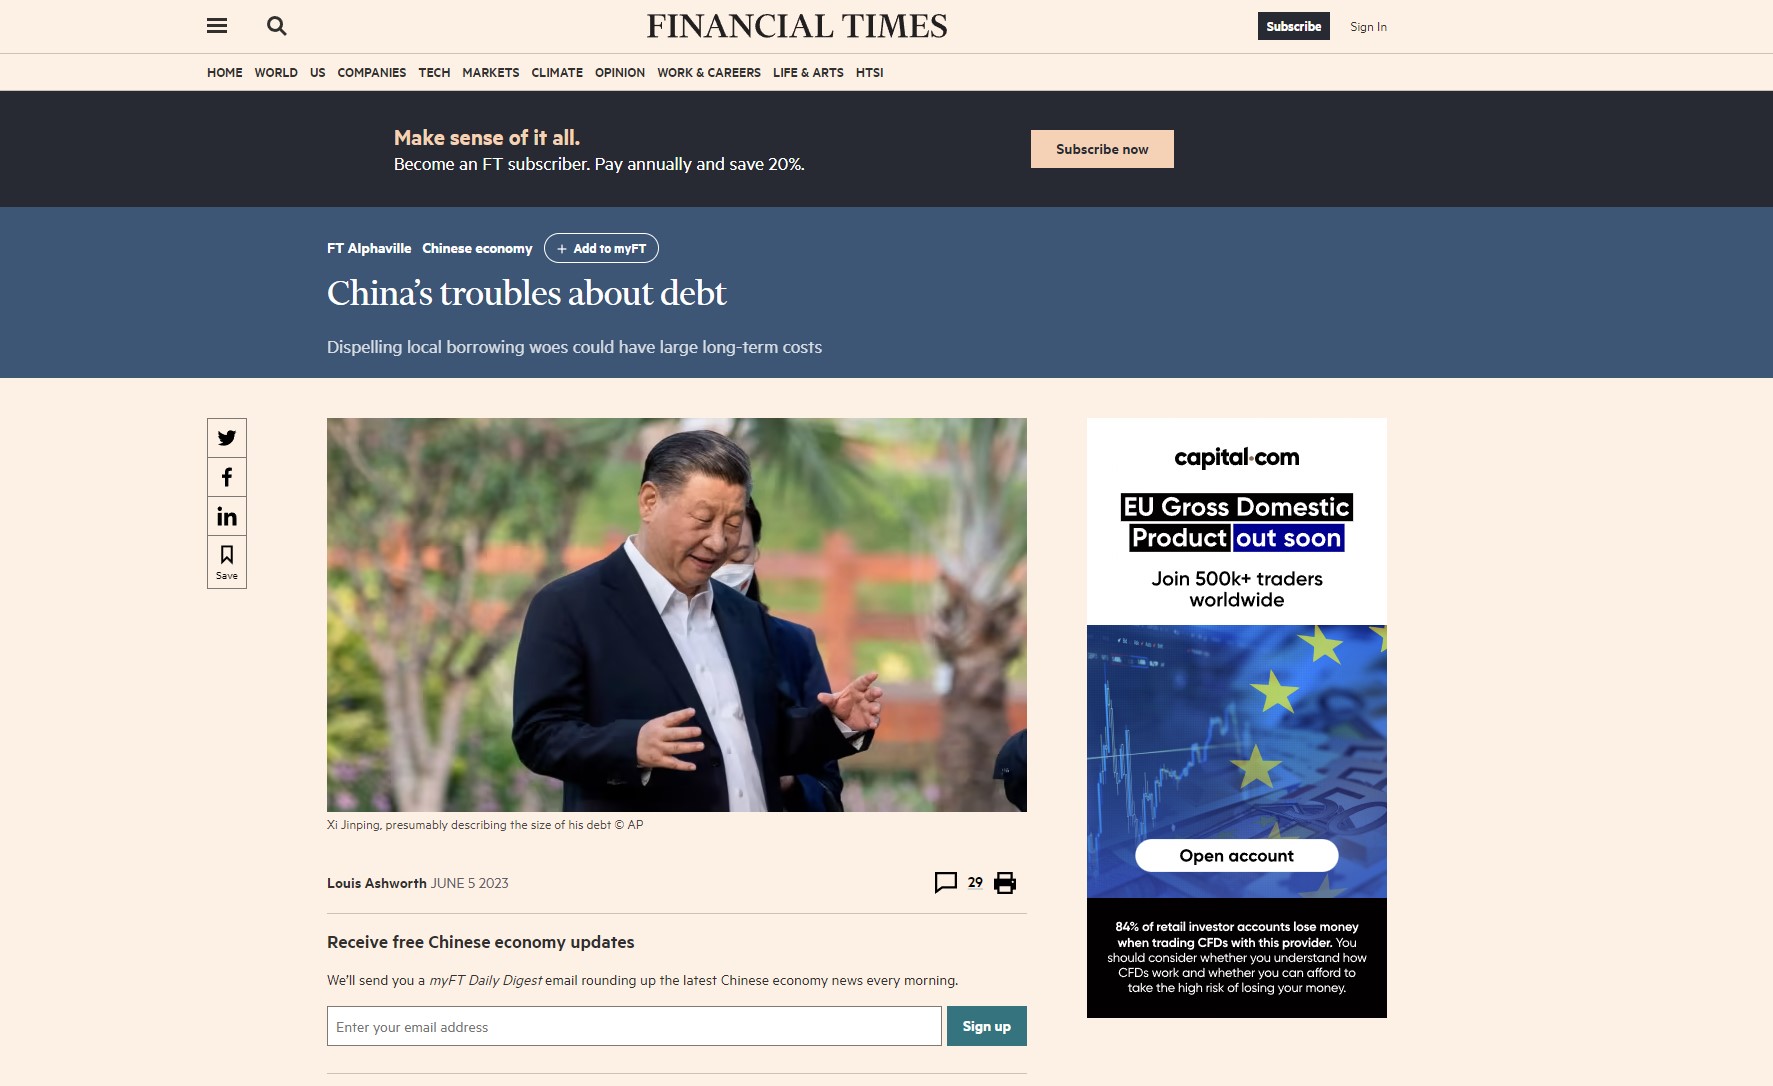 Financial Times: China’s troubles about debt